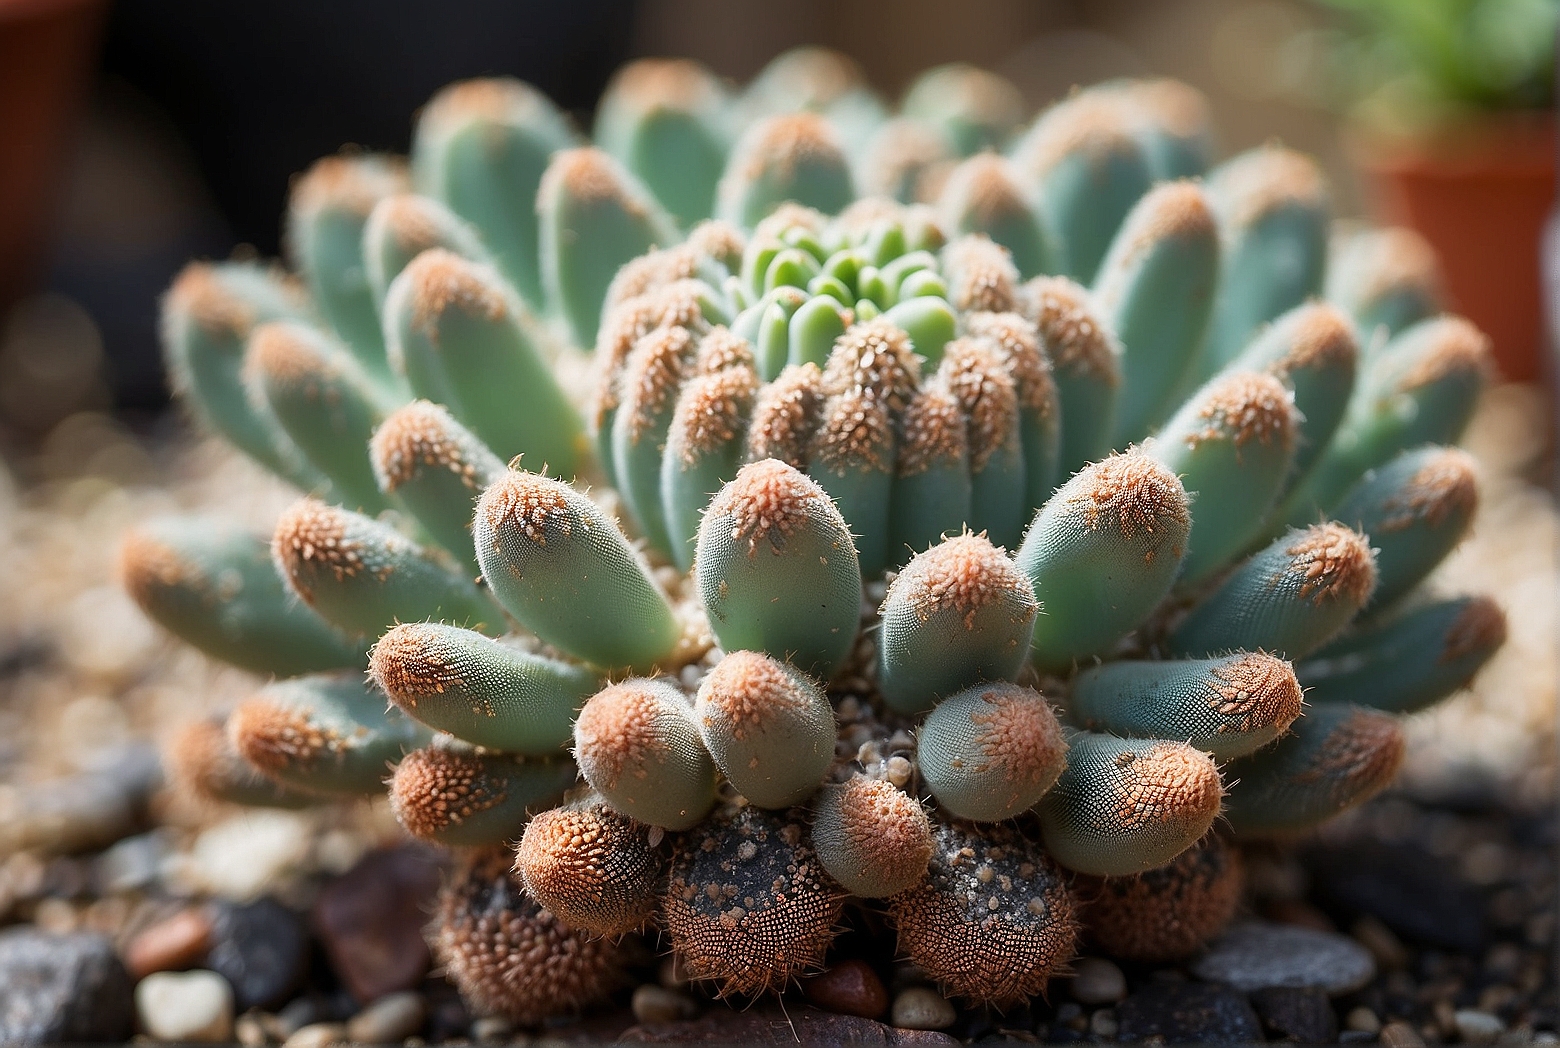 A Beginner’s Guide to Growing Peyote Cactus from Seed